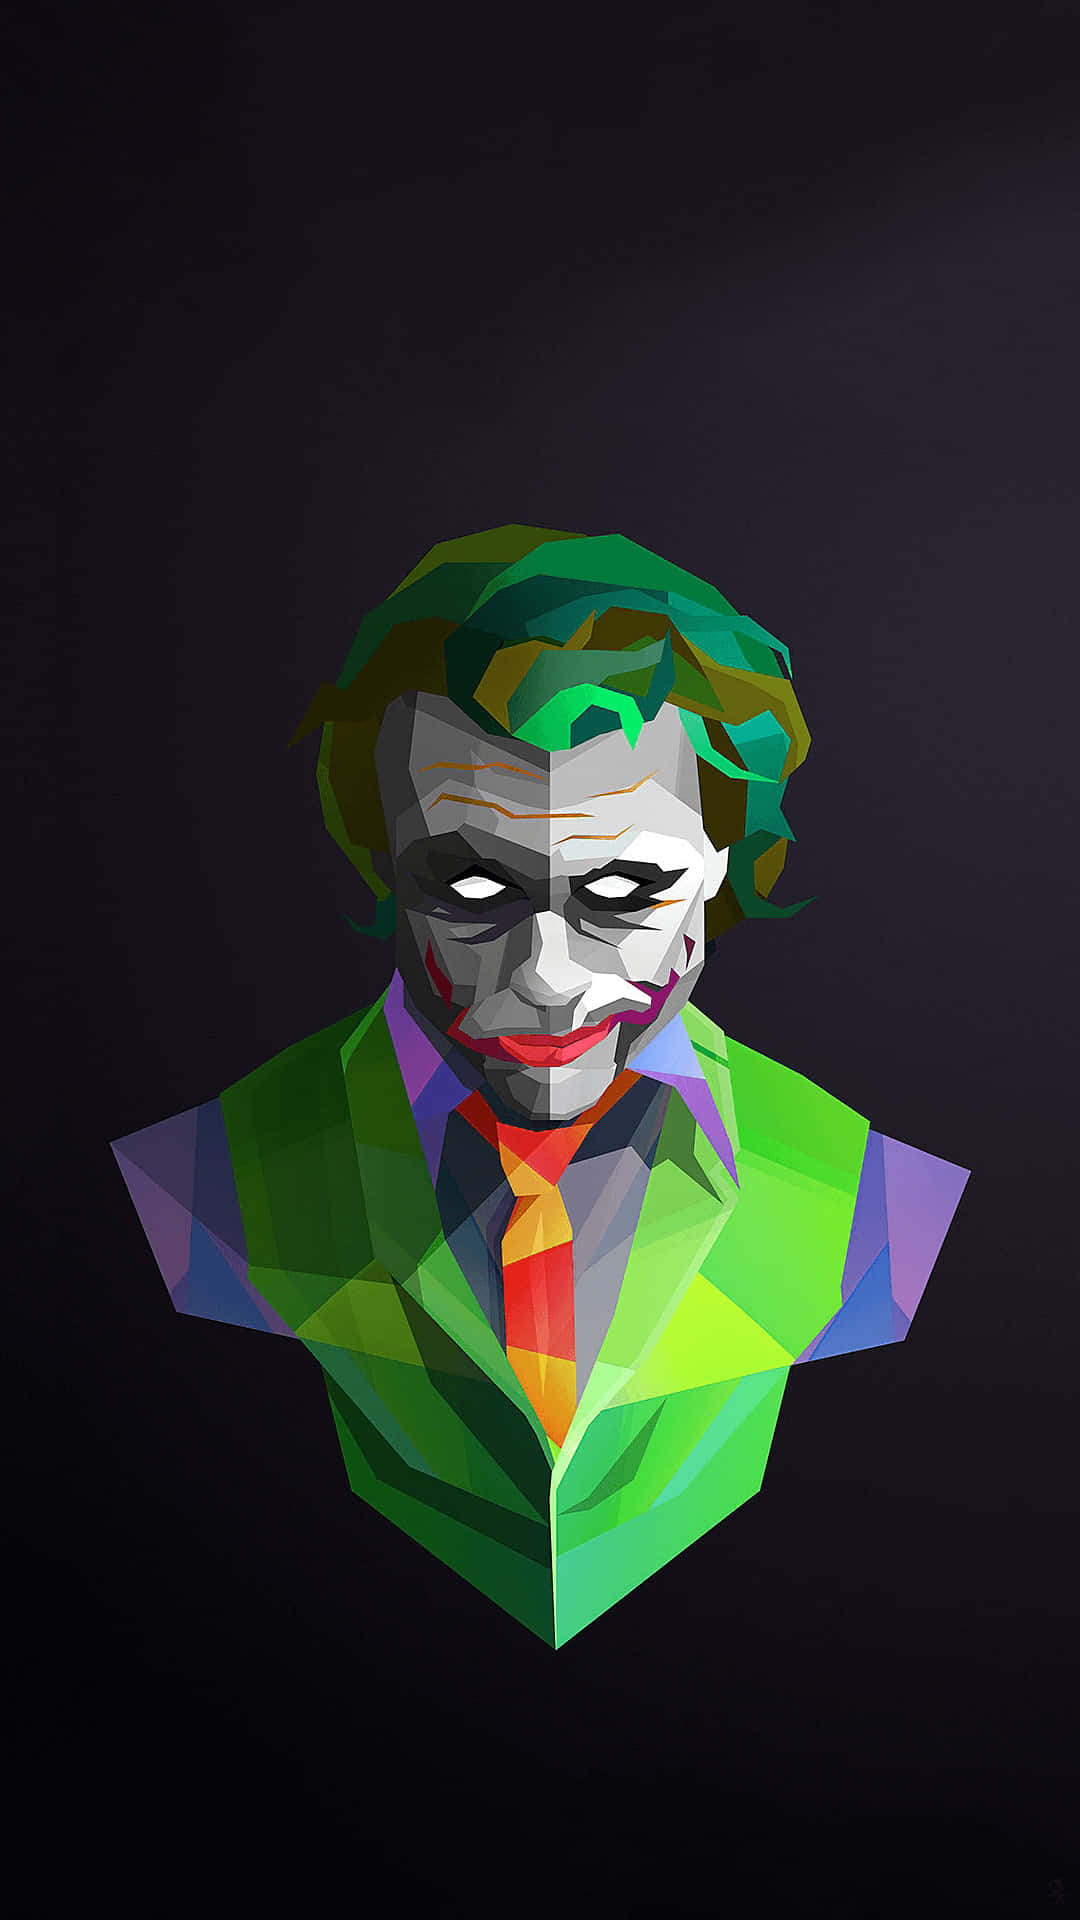 Enigmatic Joker Portrait on a Chaotic Background Wallpaper